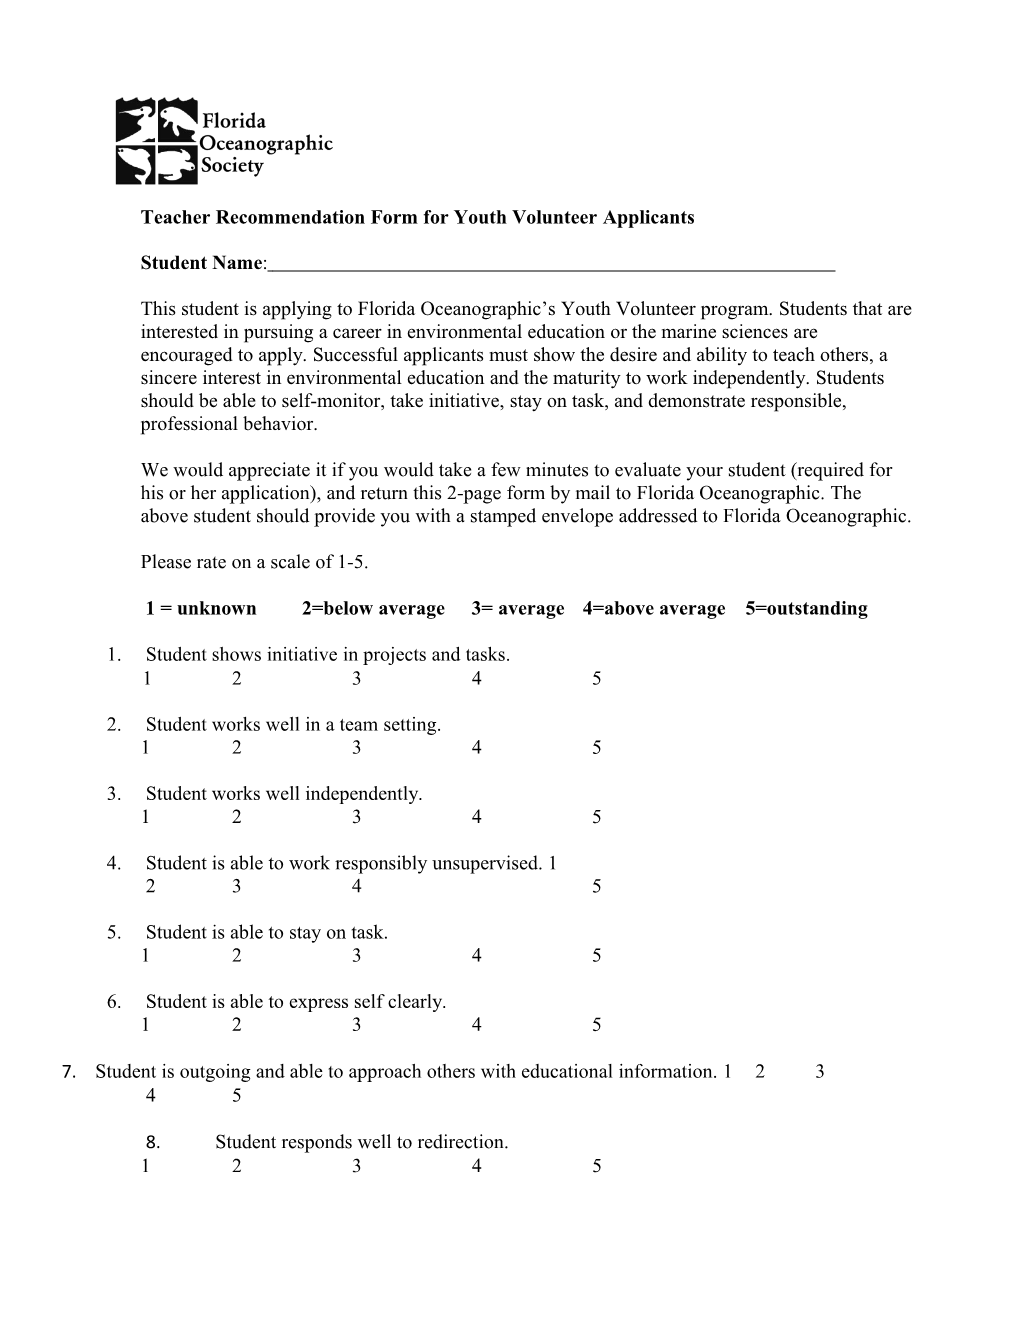 Teacher Recommendation Form for Youth Volunteerapplicants